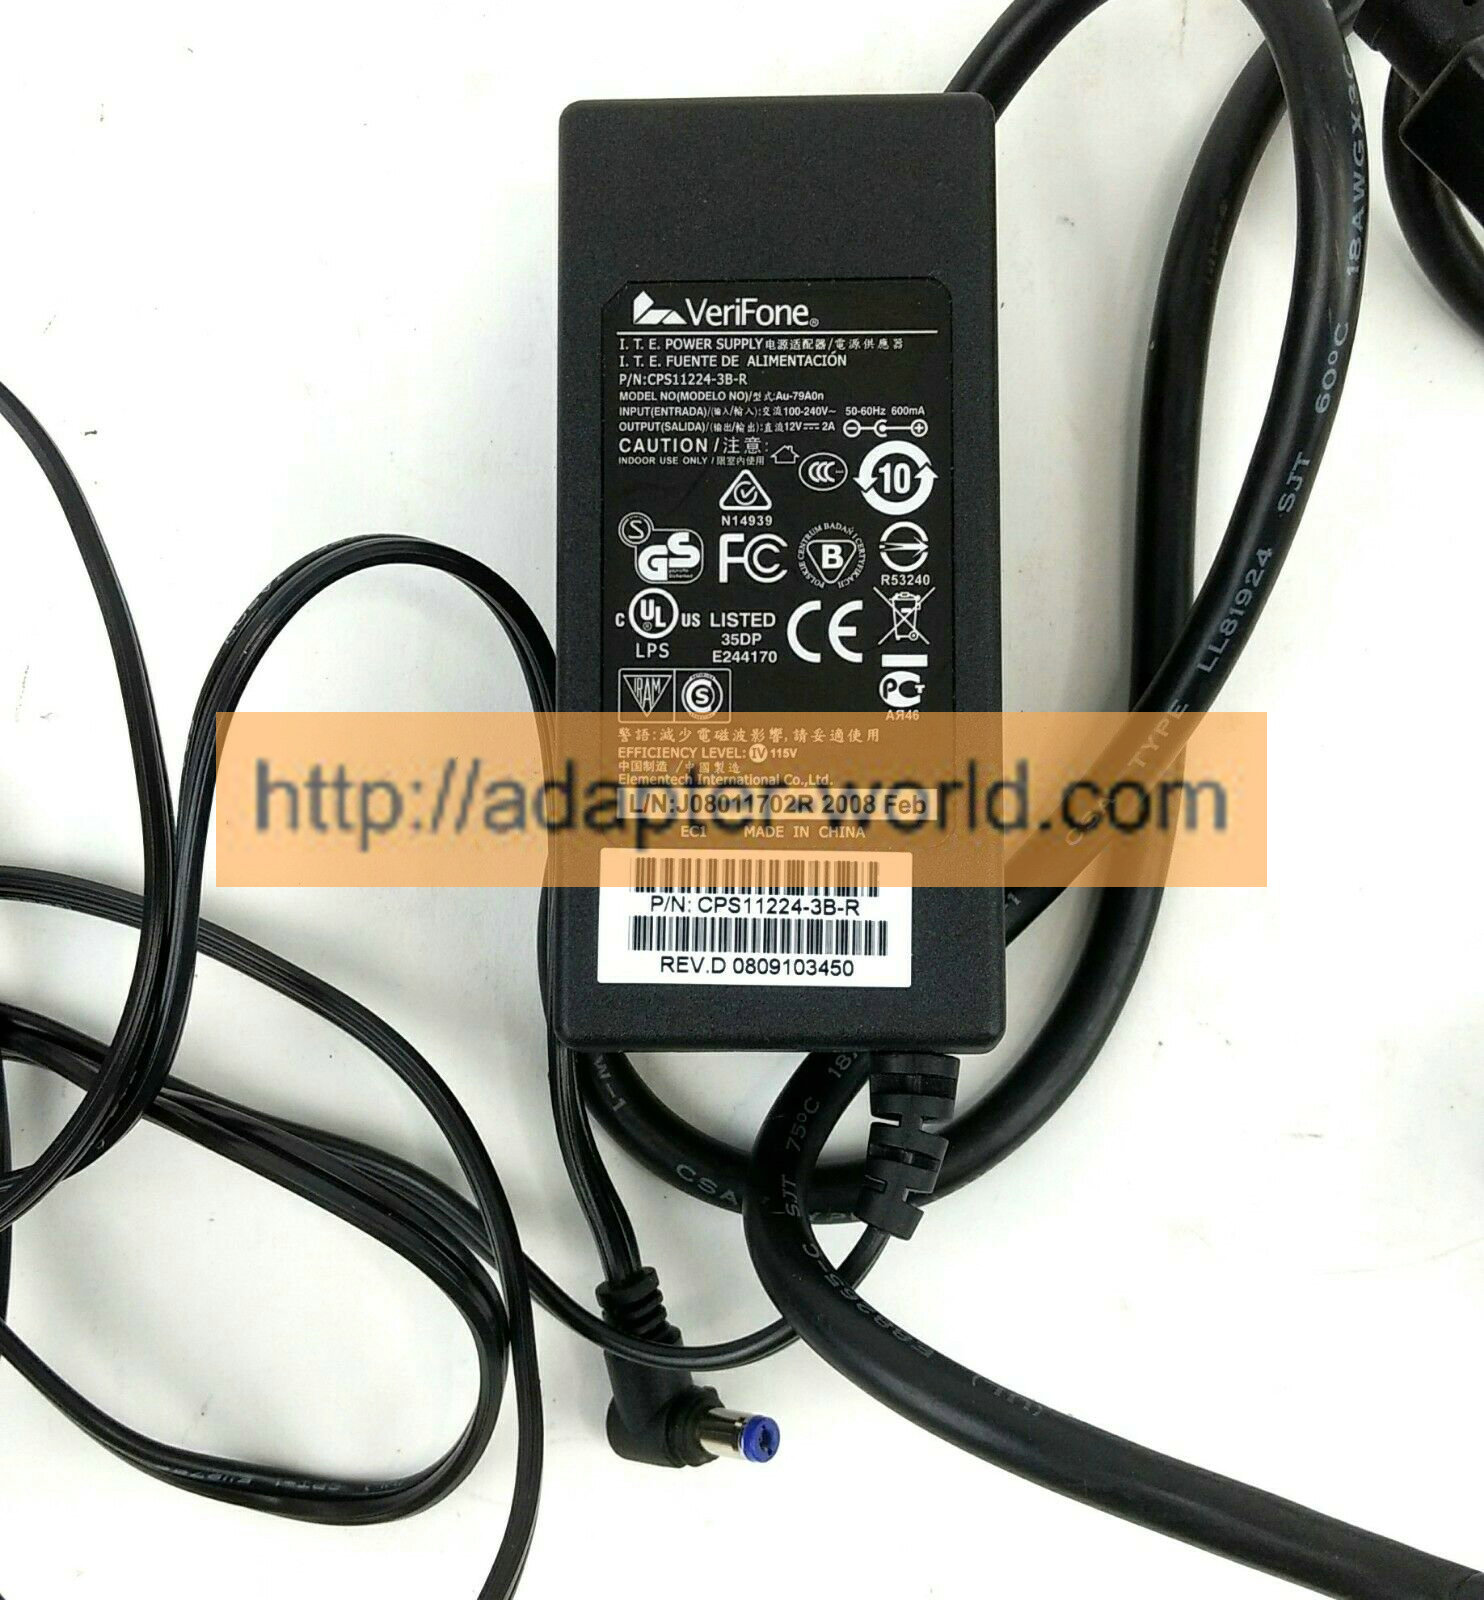 *100% Brand NEW* Verifone 12V 2A VX680 Power Adapter CPS11224-3B-R Au-79A0n AD1829 Free shipping!